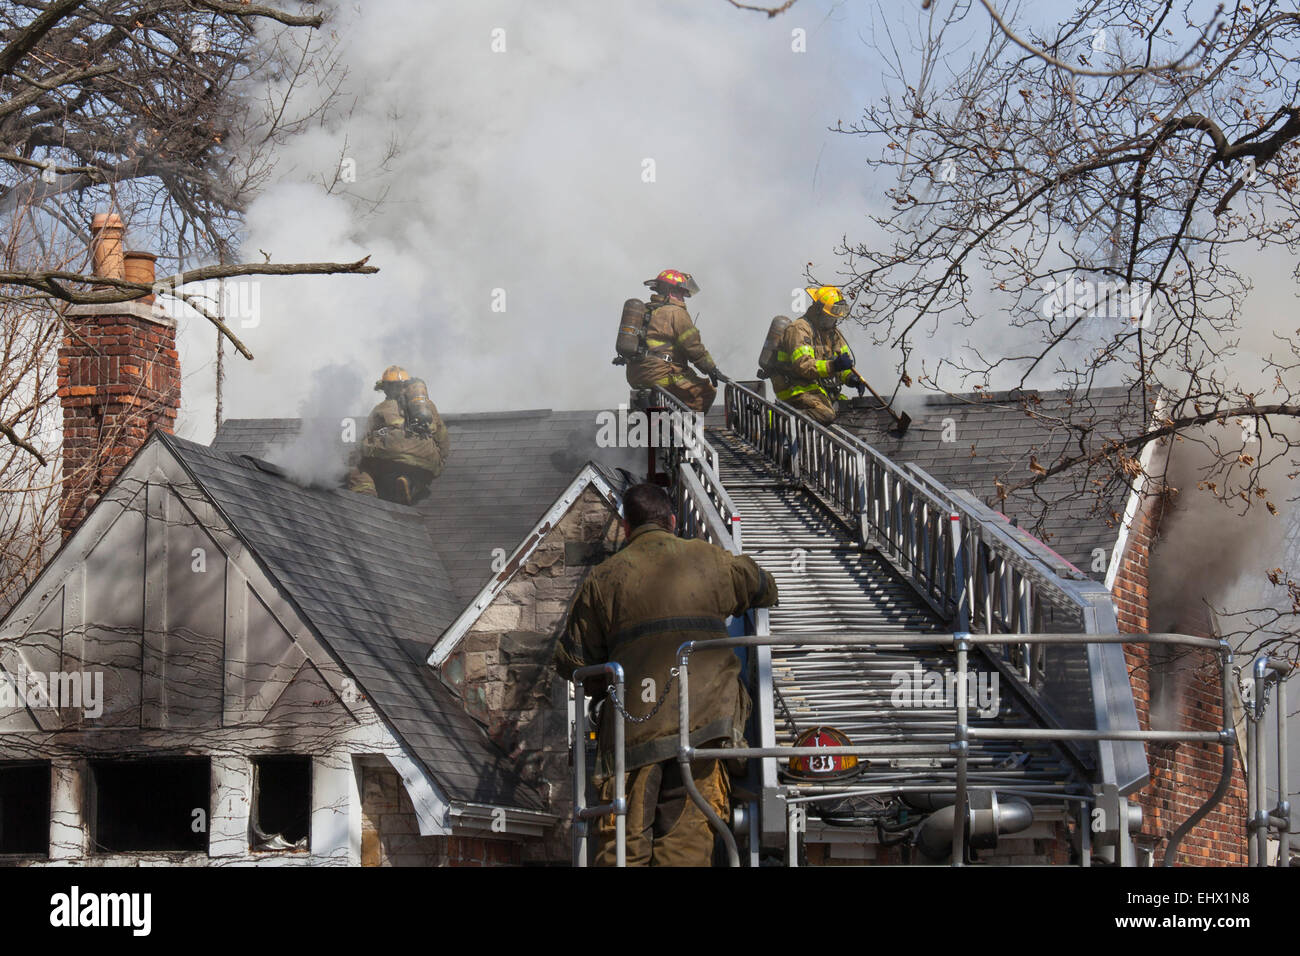 Detroit, Michigan - Firefighters battle a fire which destroyed a vacant home in Detroit's Morningside neighborhood. Stock Photo